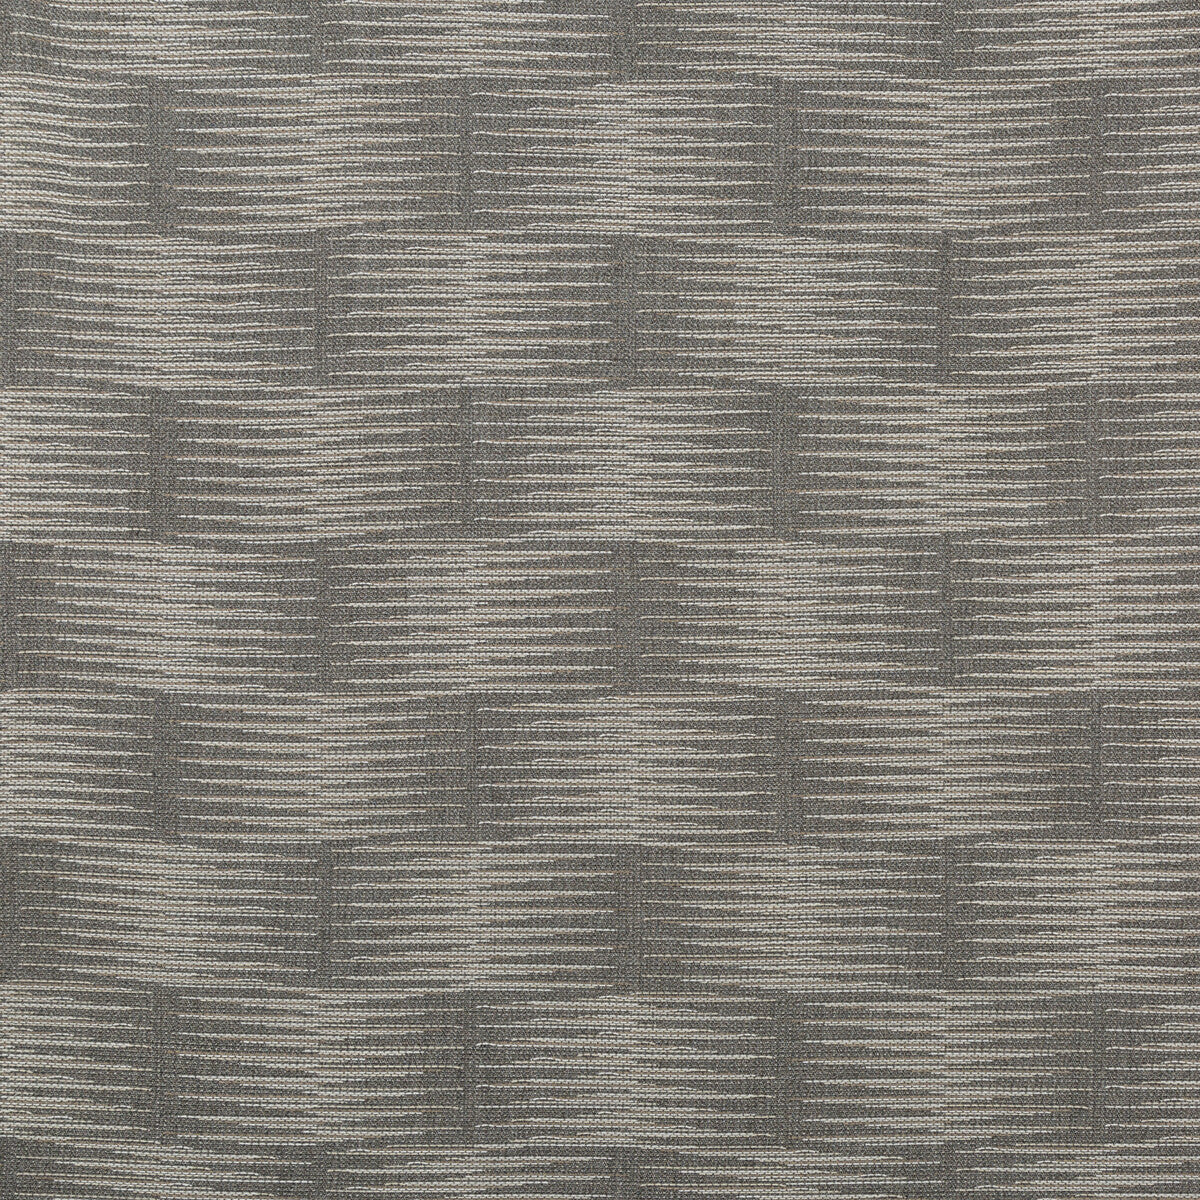 Line Drawing fabric in graphite color - pattern 35495.21.0 - by Kravet Couture in the Vista collection